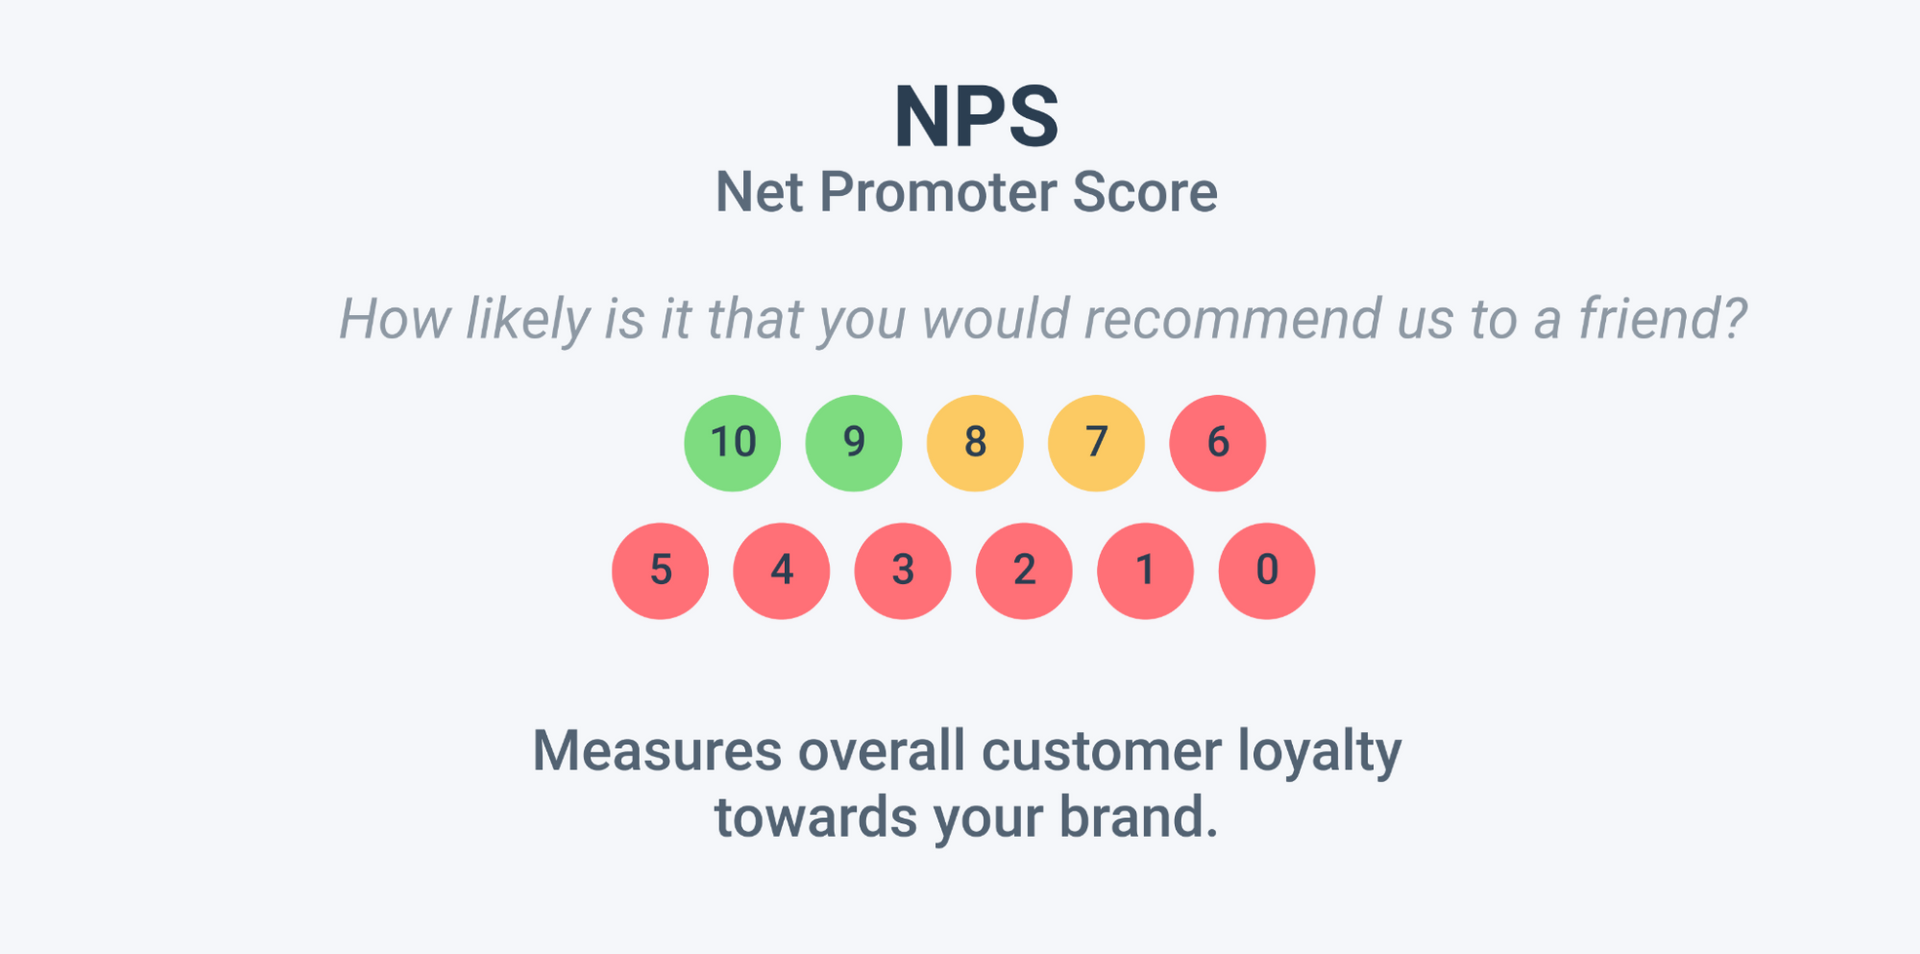 The close-ended Net Promoter Score question asks 'How likely is it that you would recommend us to a friend?' and provides a series of number from 0-10 to choose from.